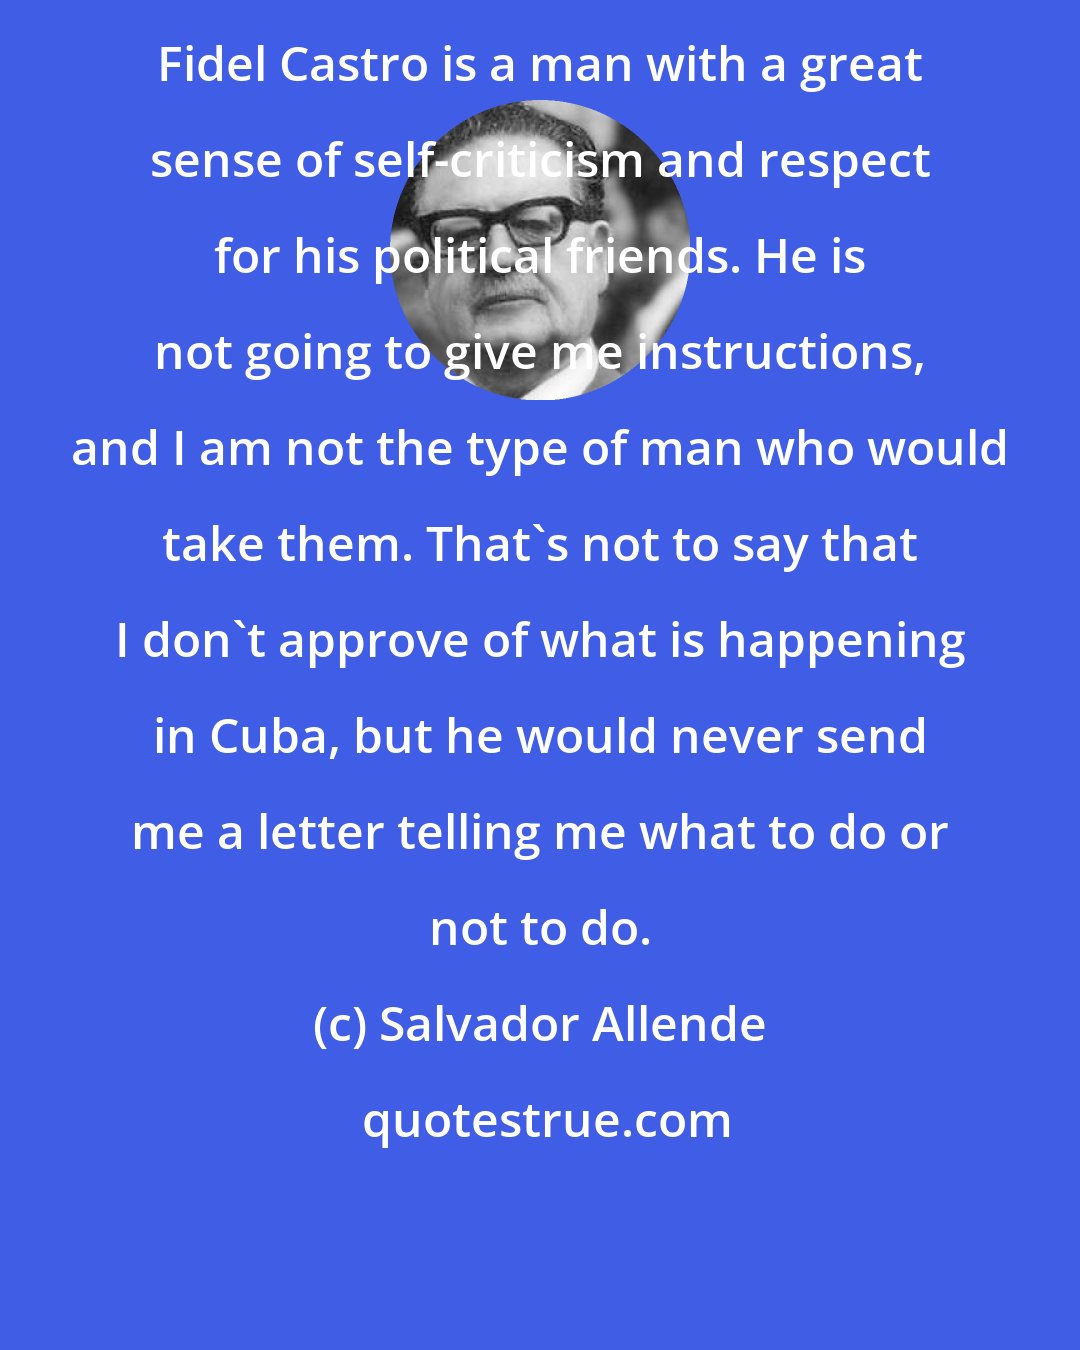 Salvador Allende: Fidel Castro is a man with a great sense of self-criticism and respect for his political friends. He is not going to give me instructions, and I am not the type of man who would take them. That's not to say that I don't approve of what is happening in Cuba, but he would never send me a letter telling me what to do or not to do.